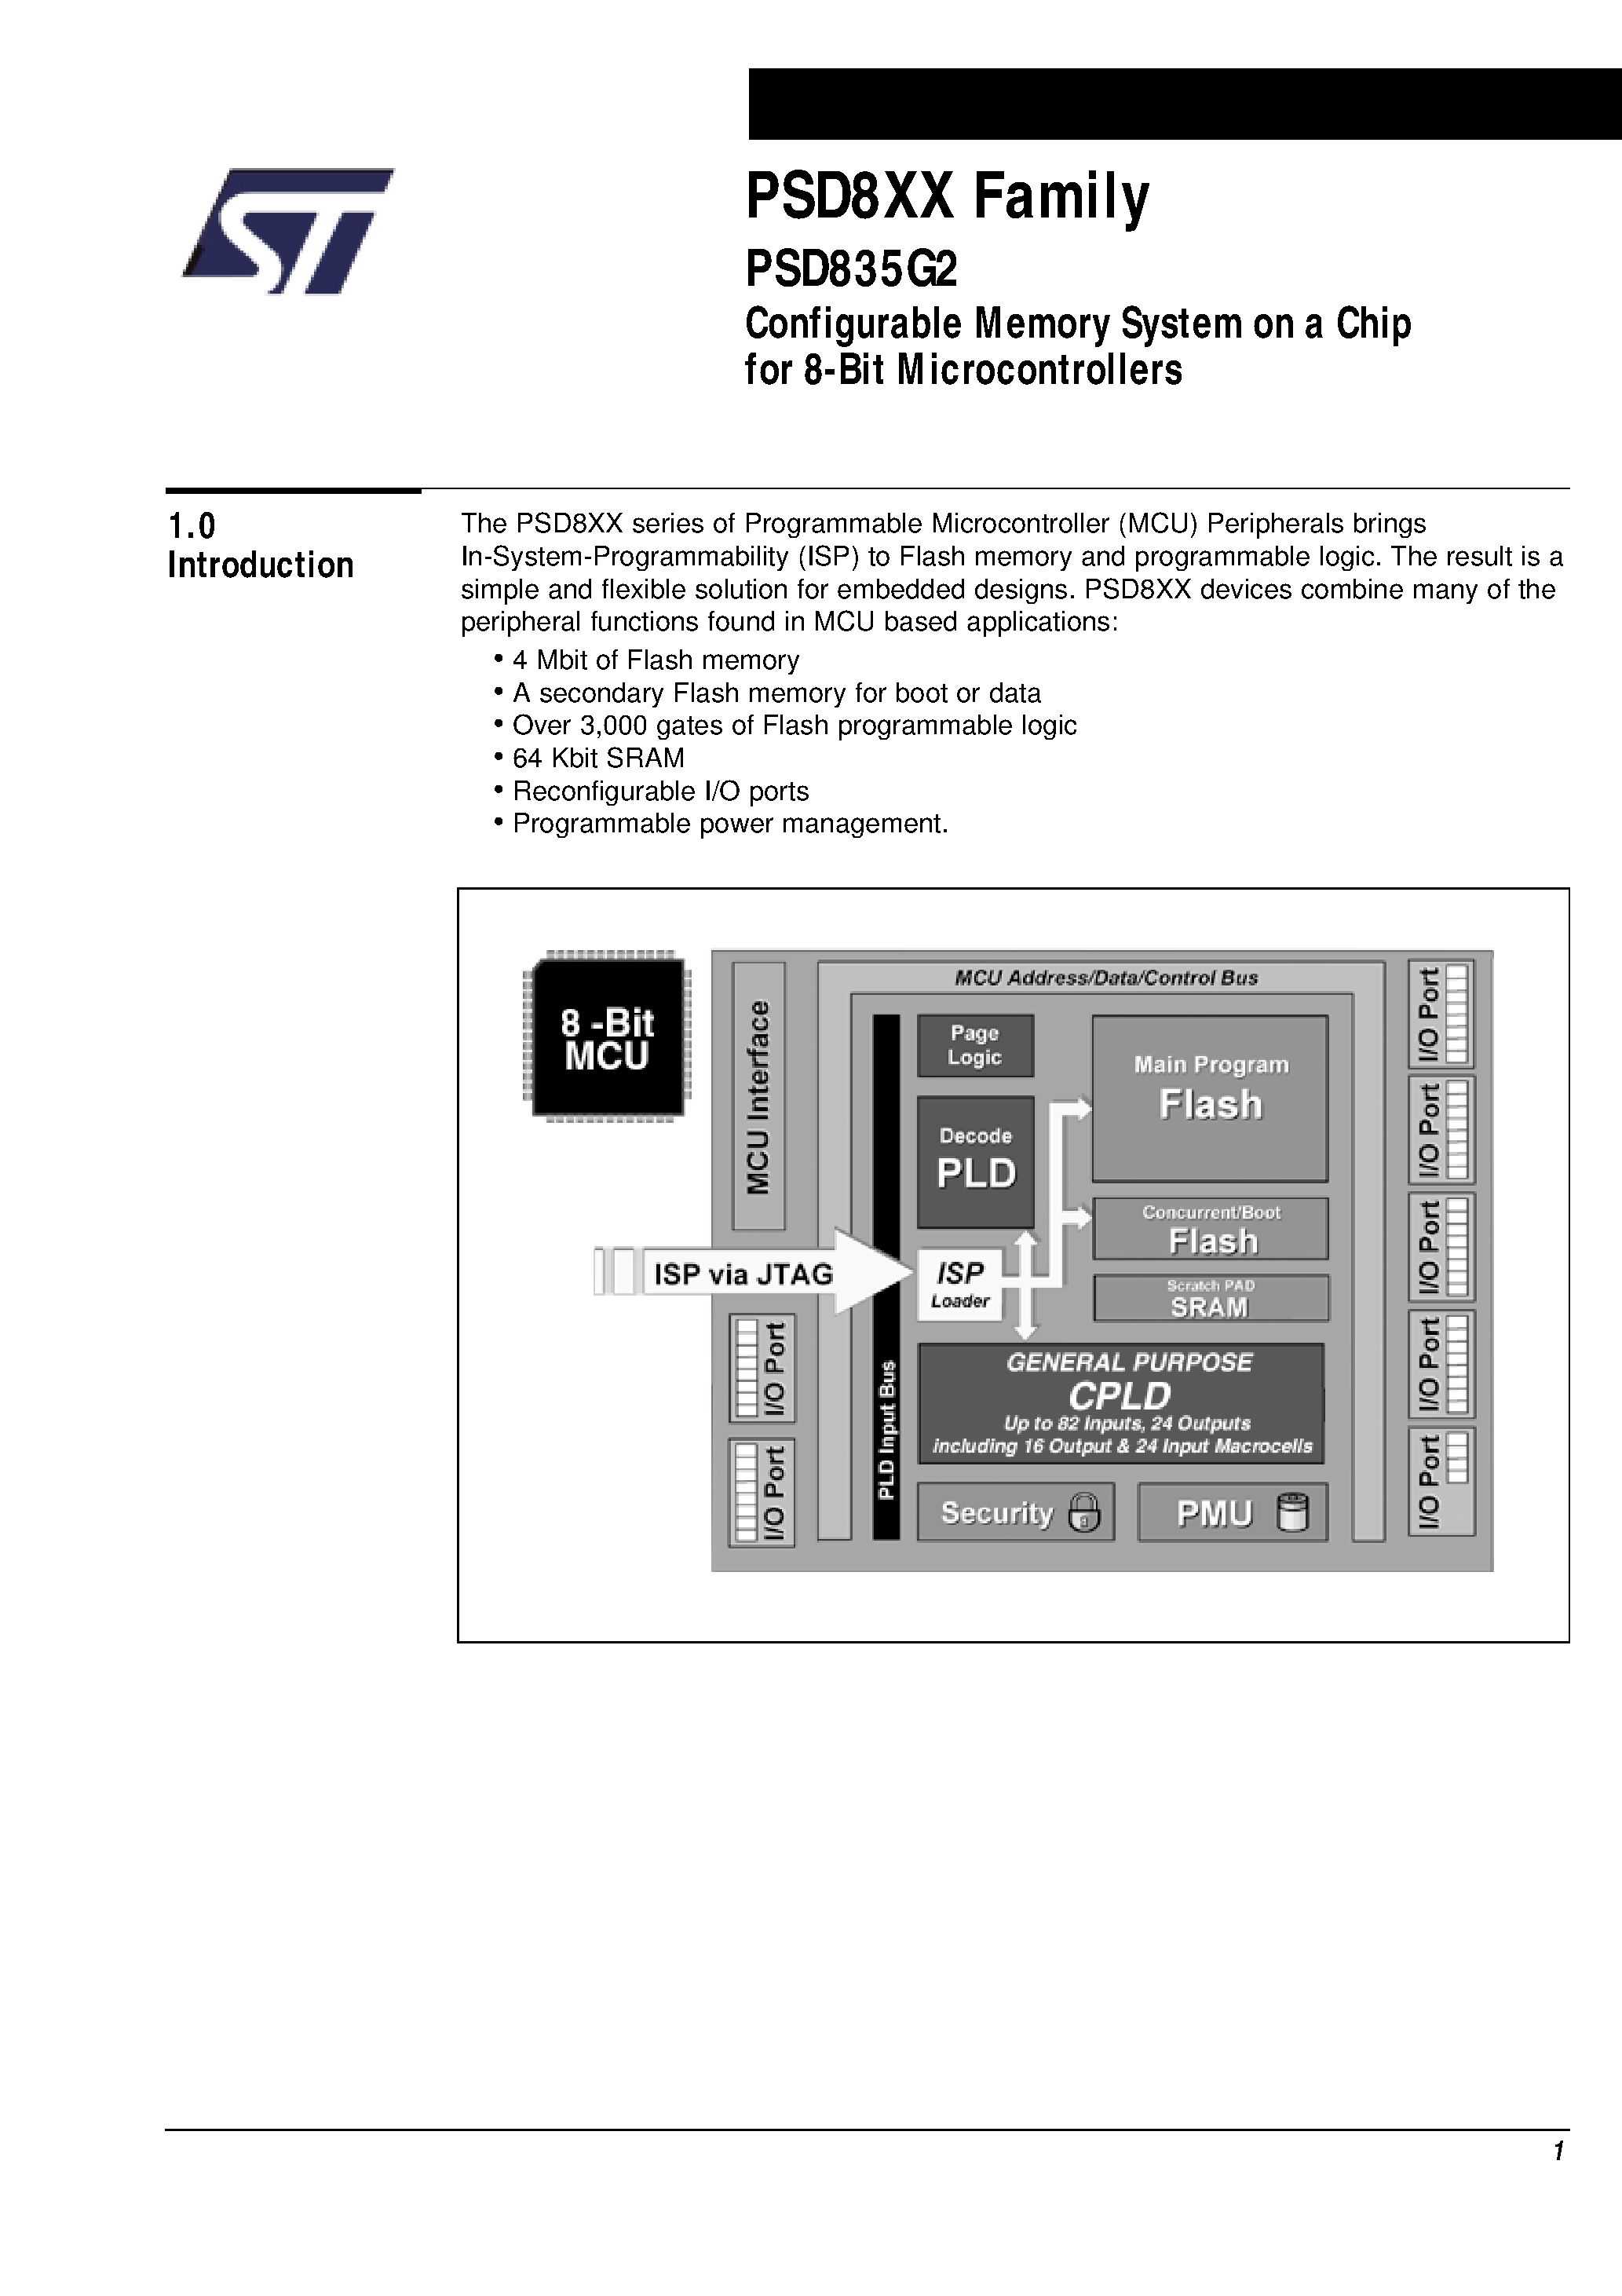 Datasheet PSD835F2-A-90U - Configurable Memory System on a Chip for 8-Bit Microcontrollers page 2